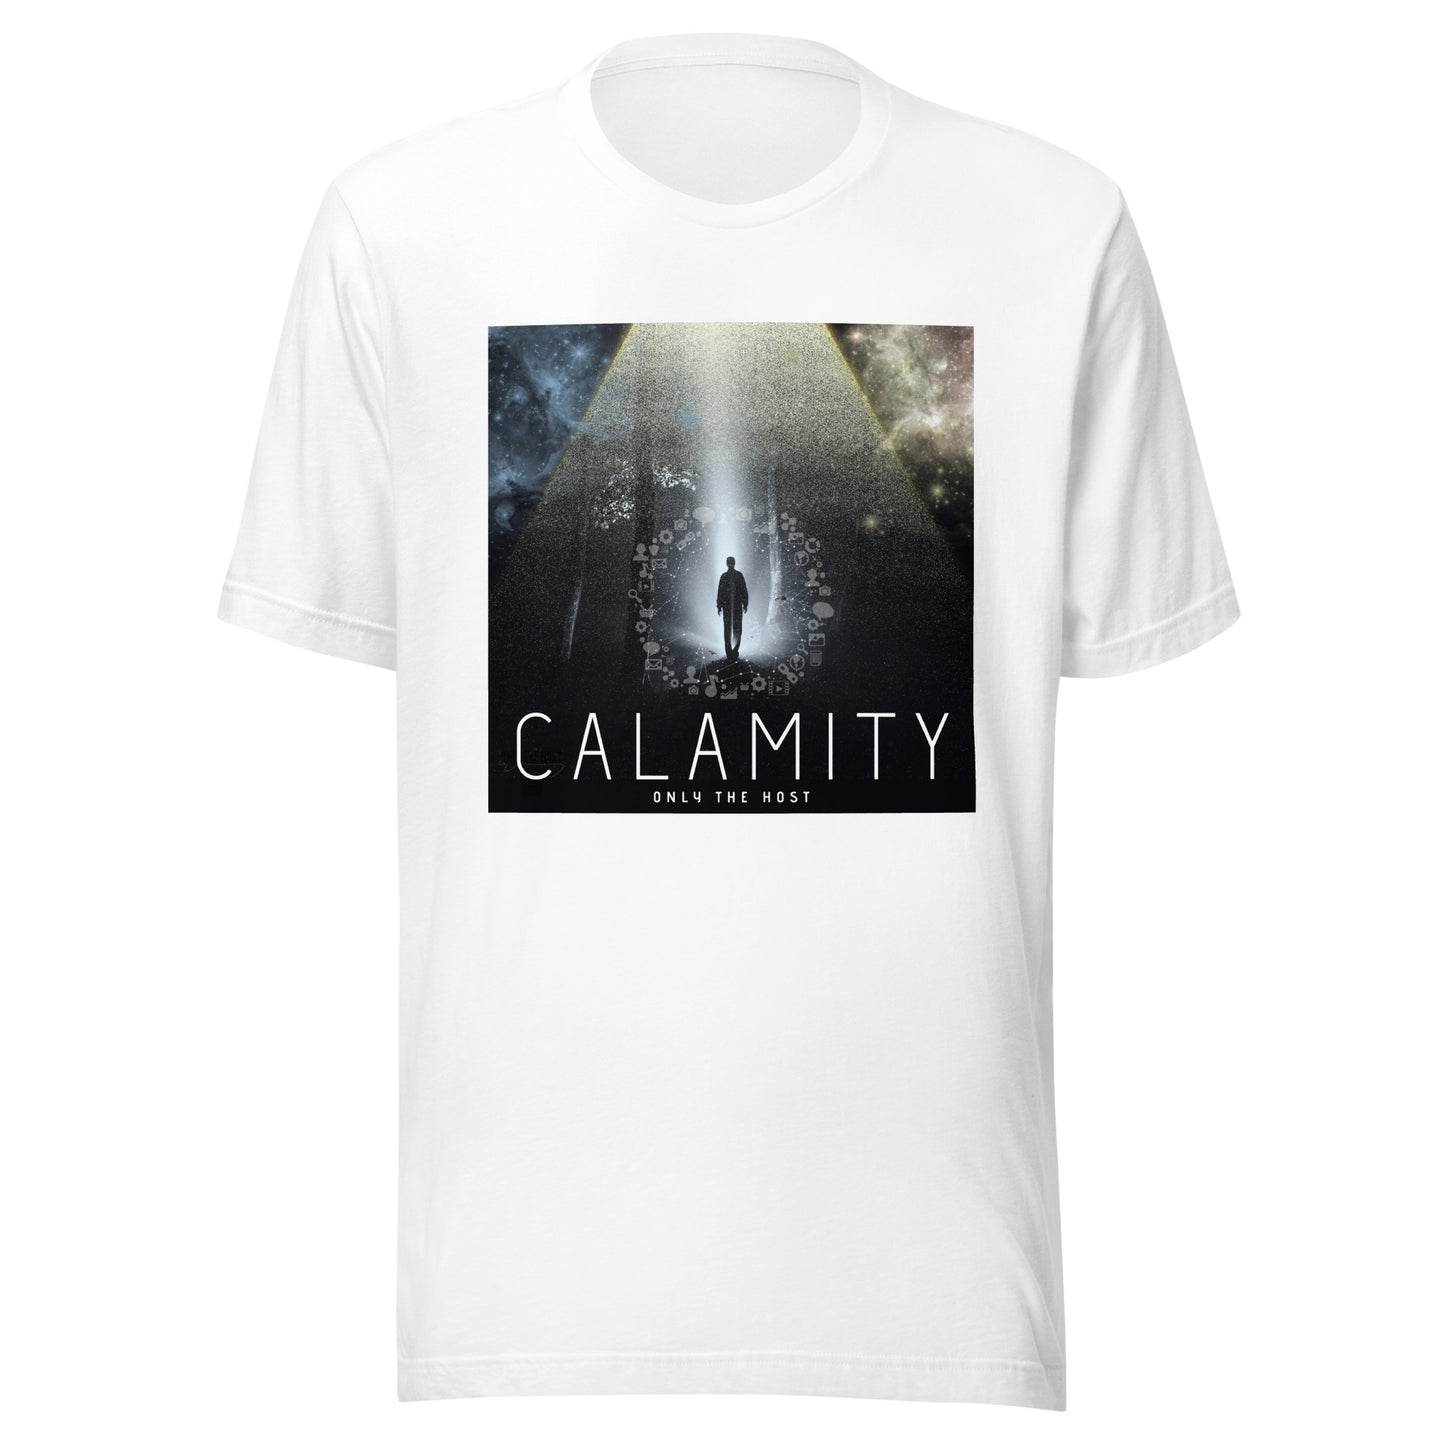 Only The Host - Calamity T-Shirt